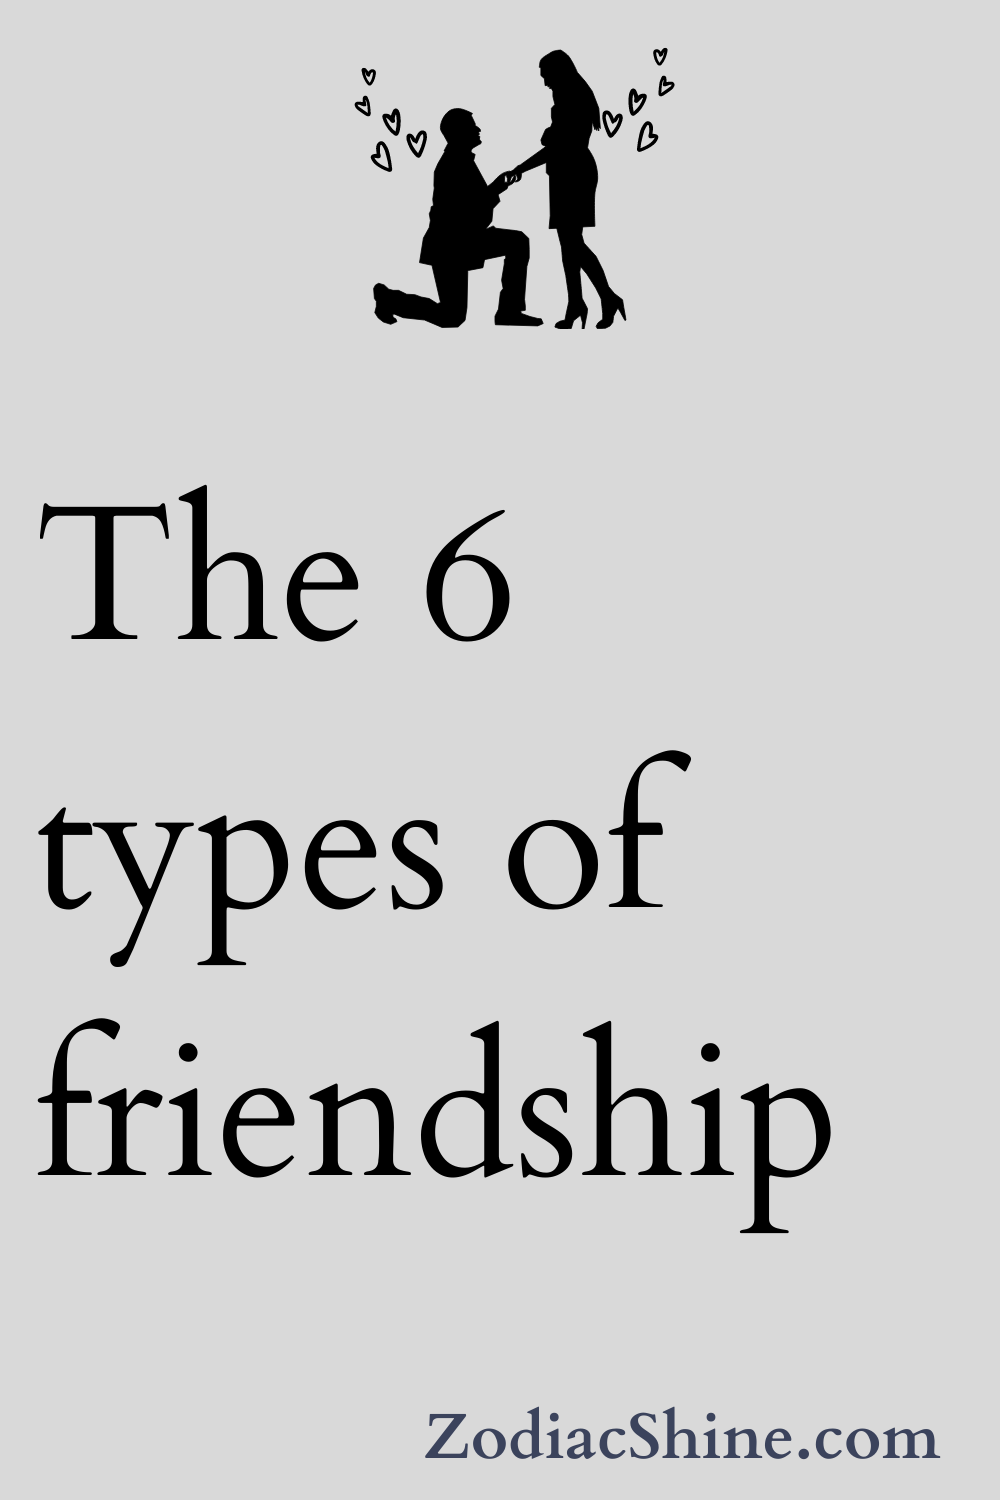 The 6 types of friendship